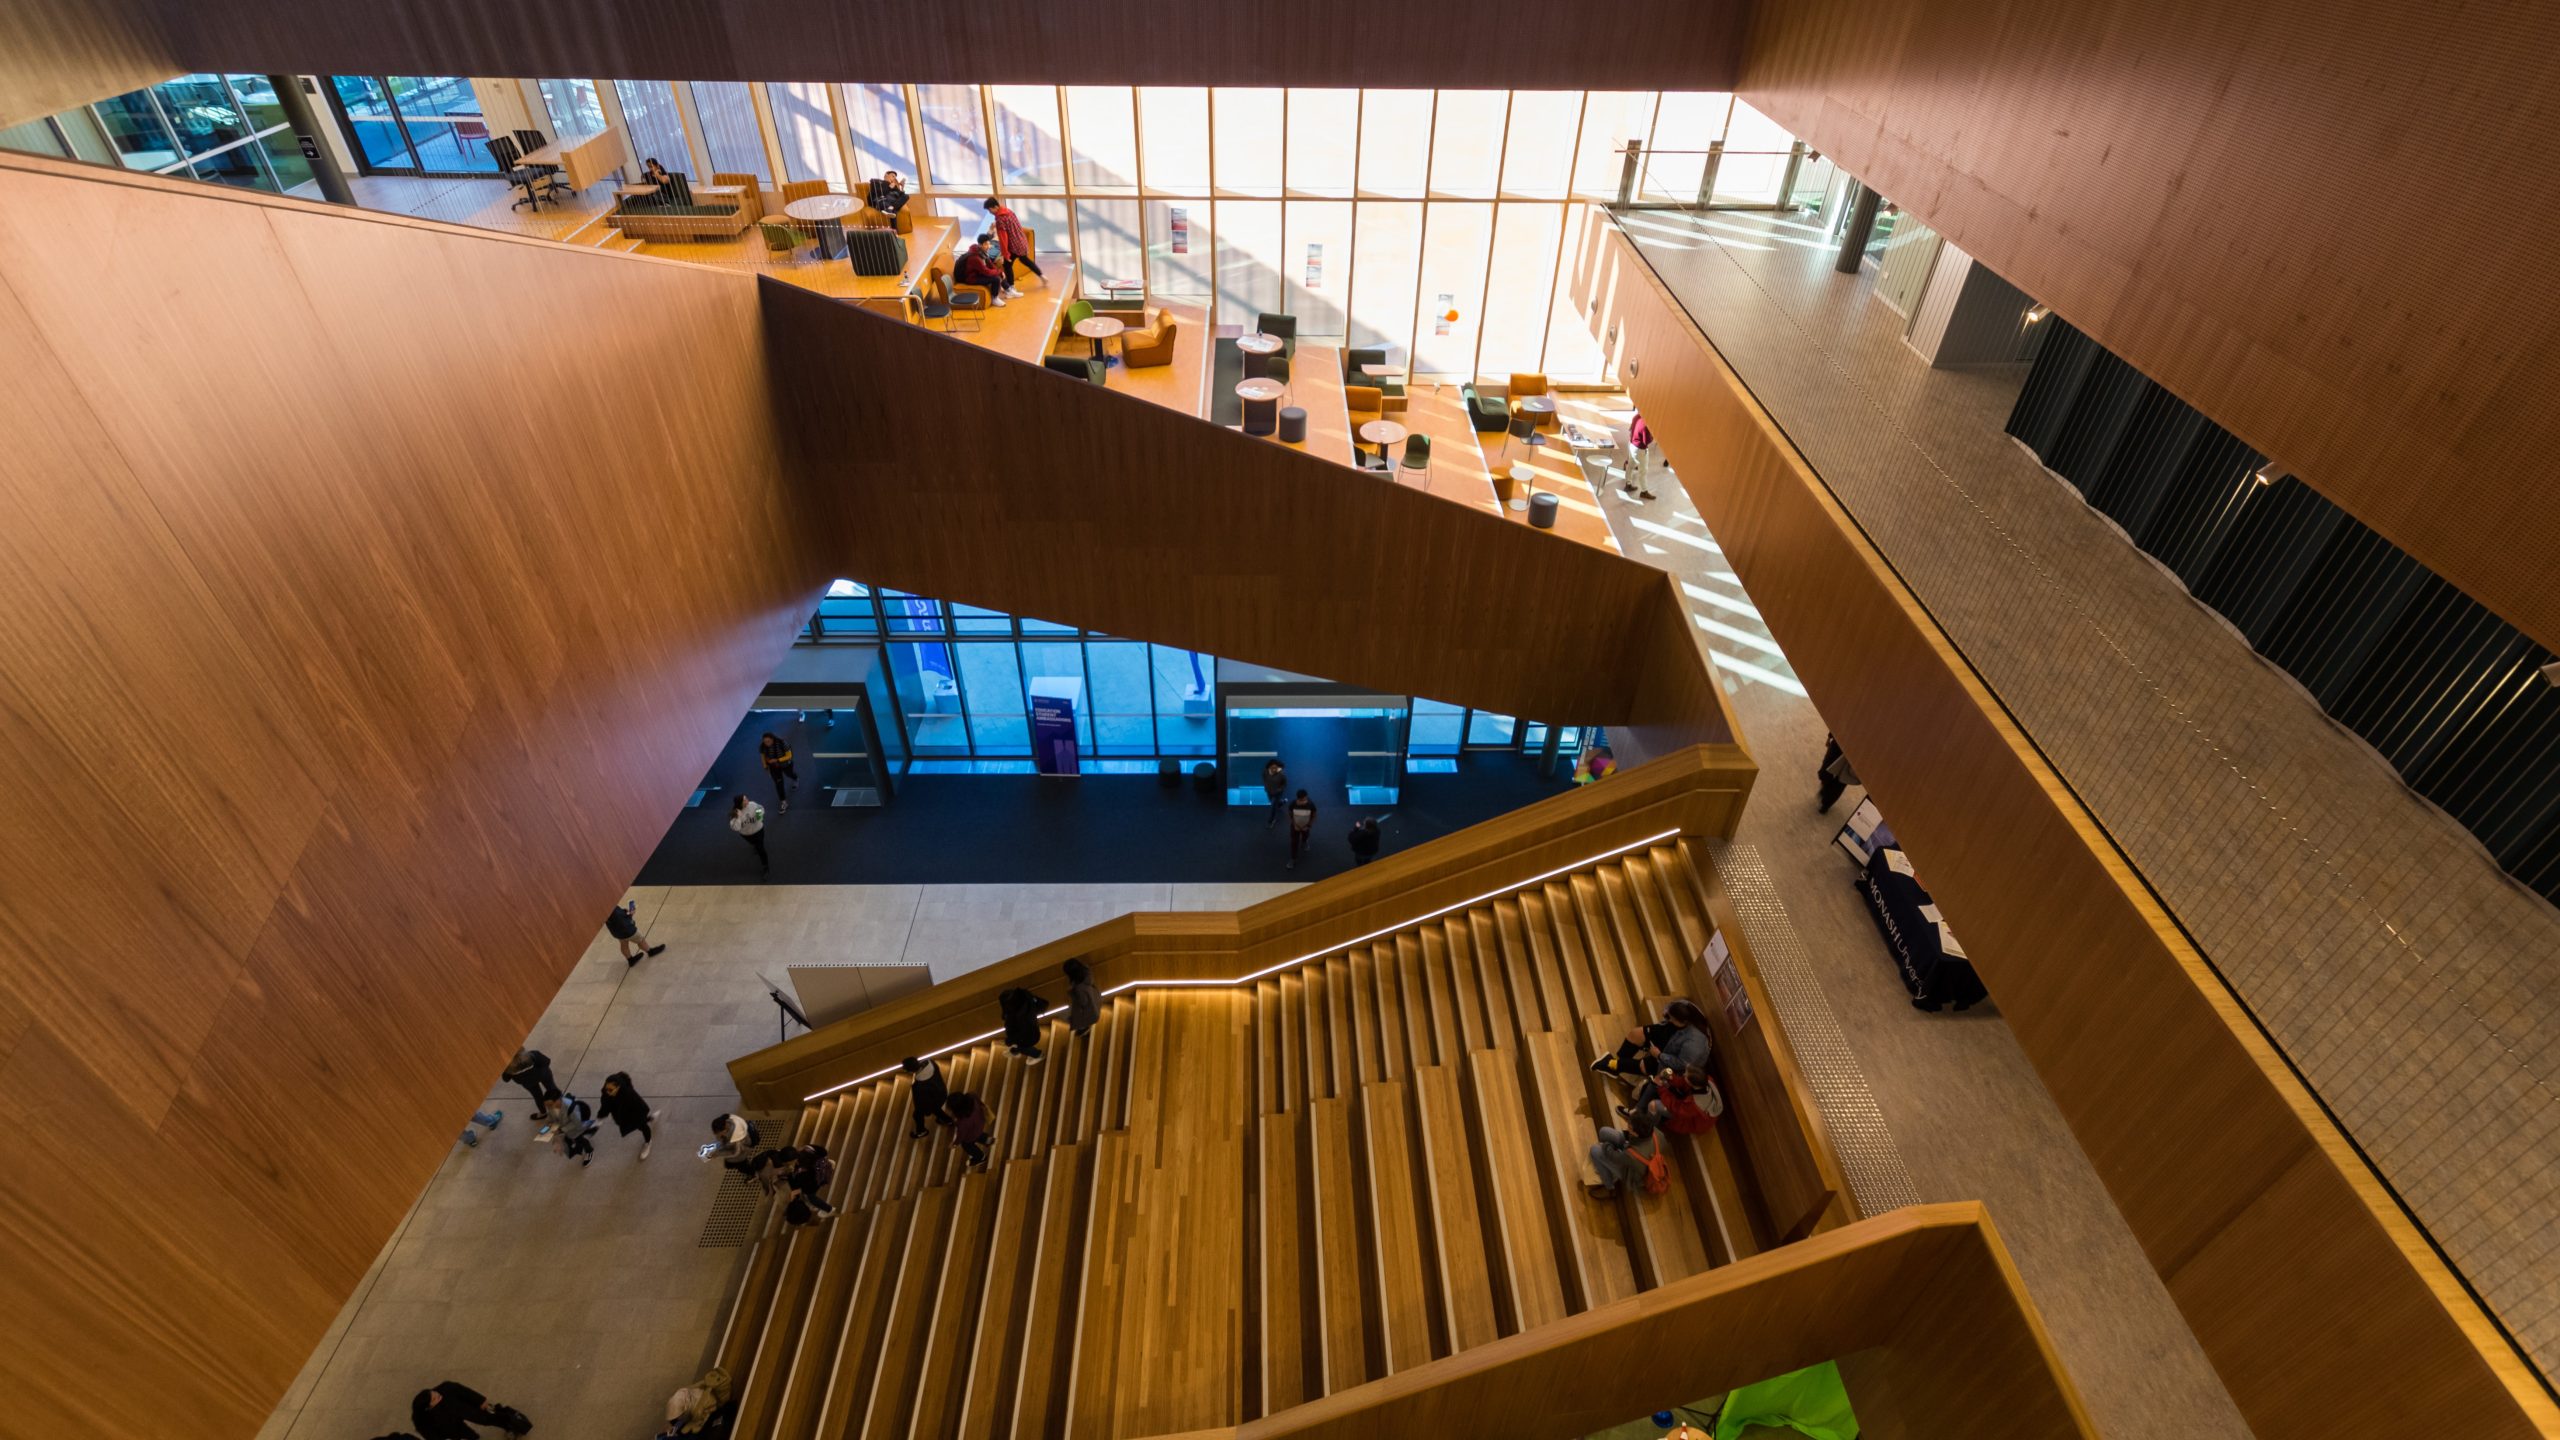 Photograph of an open artrium at a university looking down on wooden stairs that double as lecture seating.